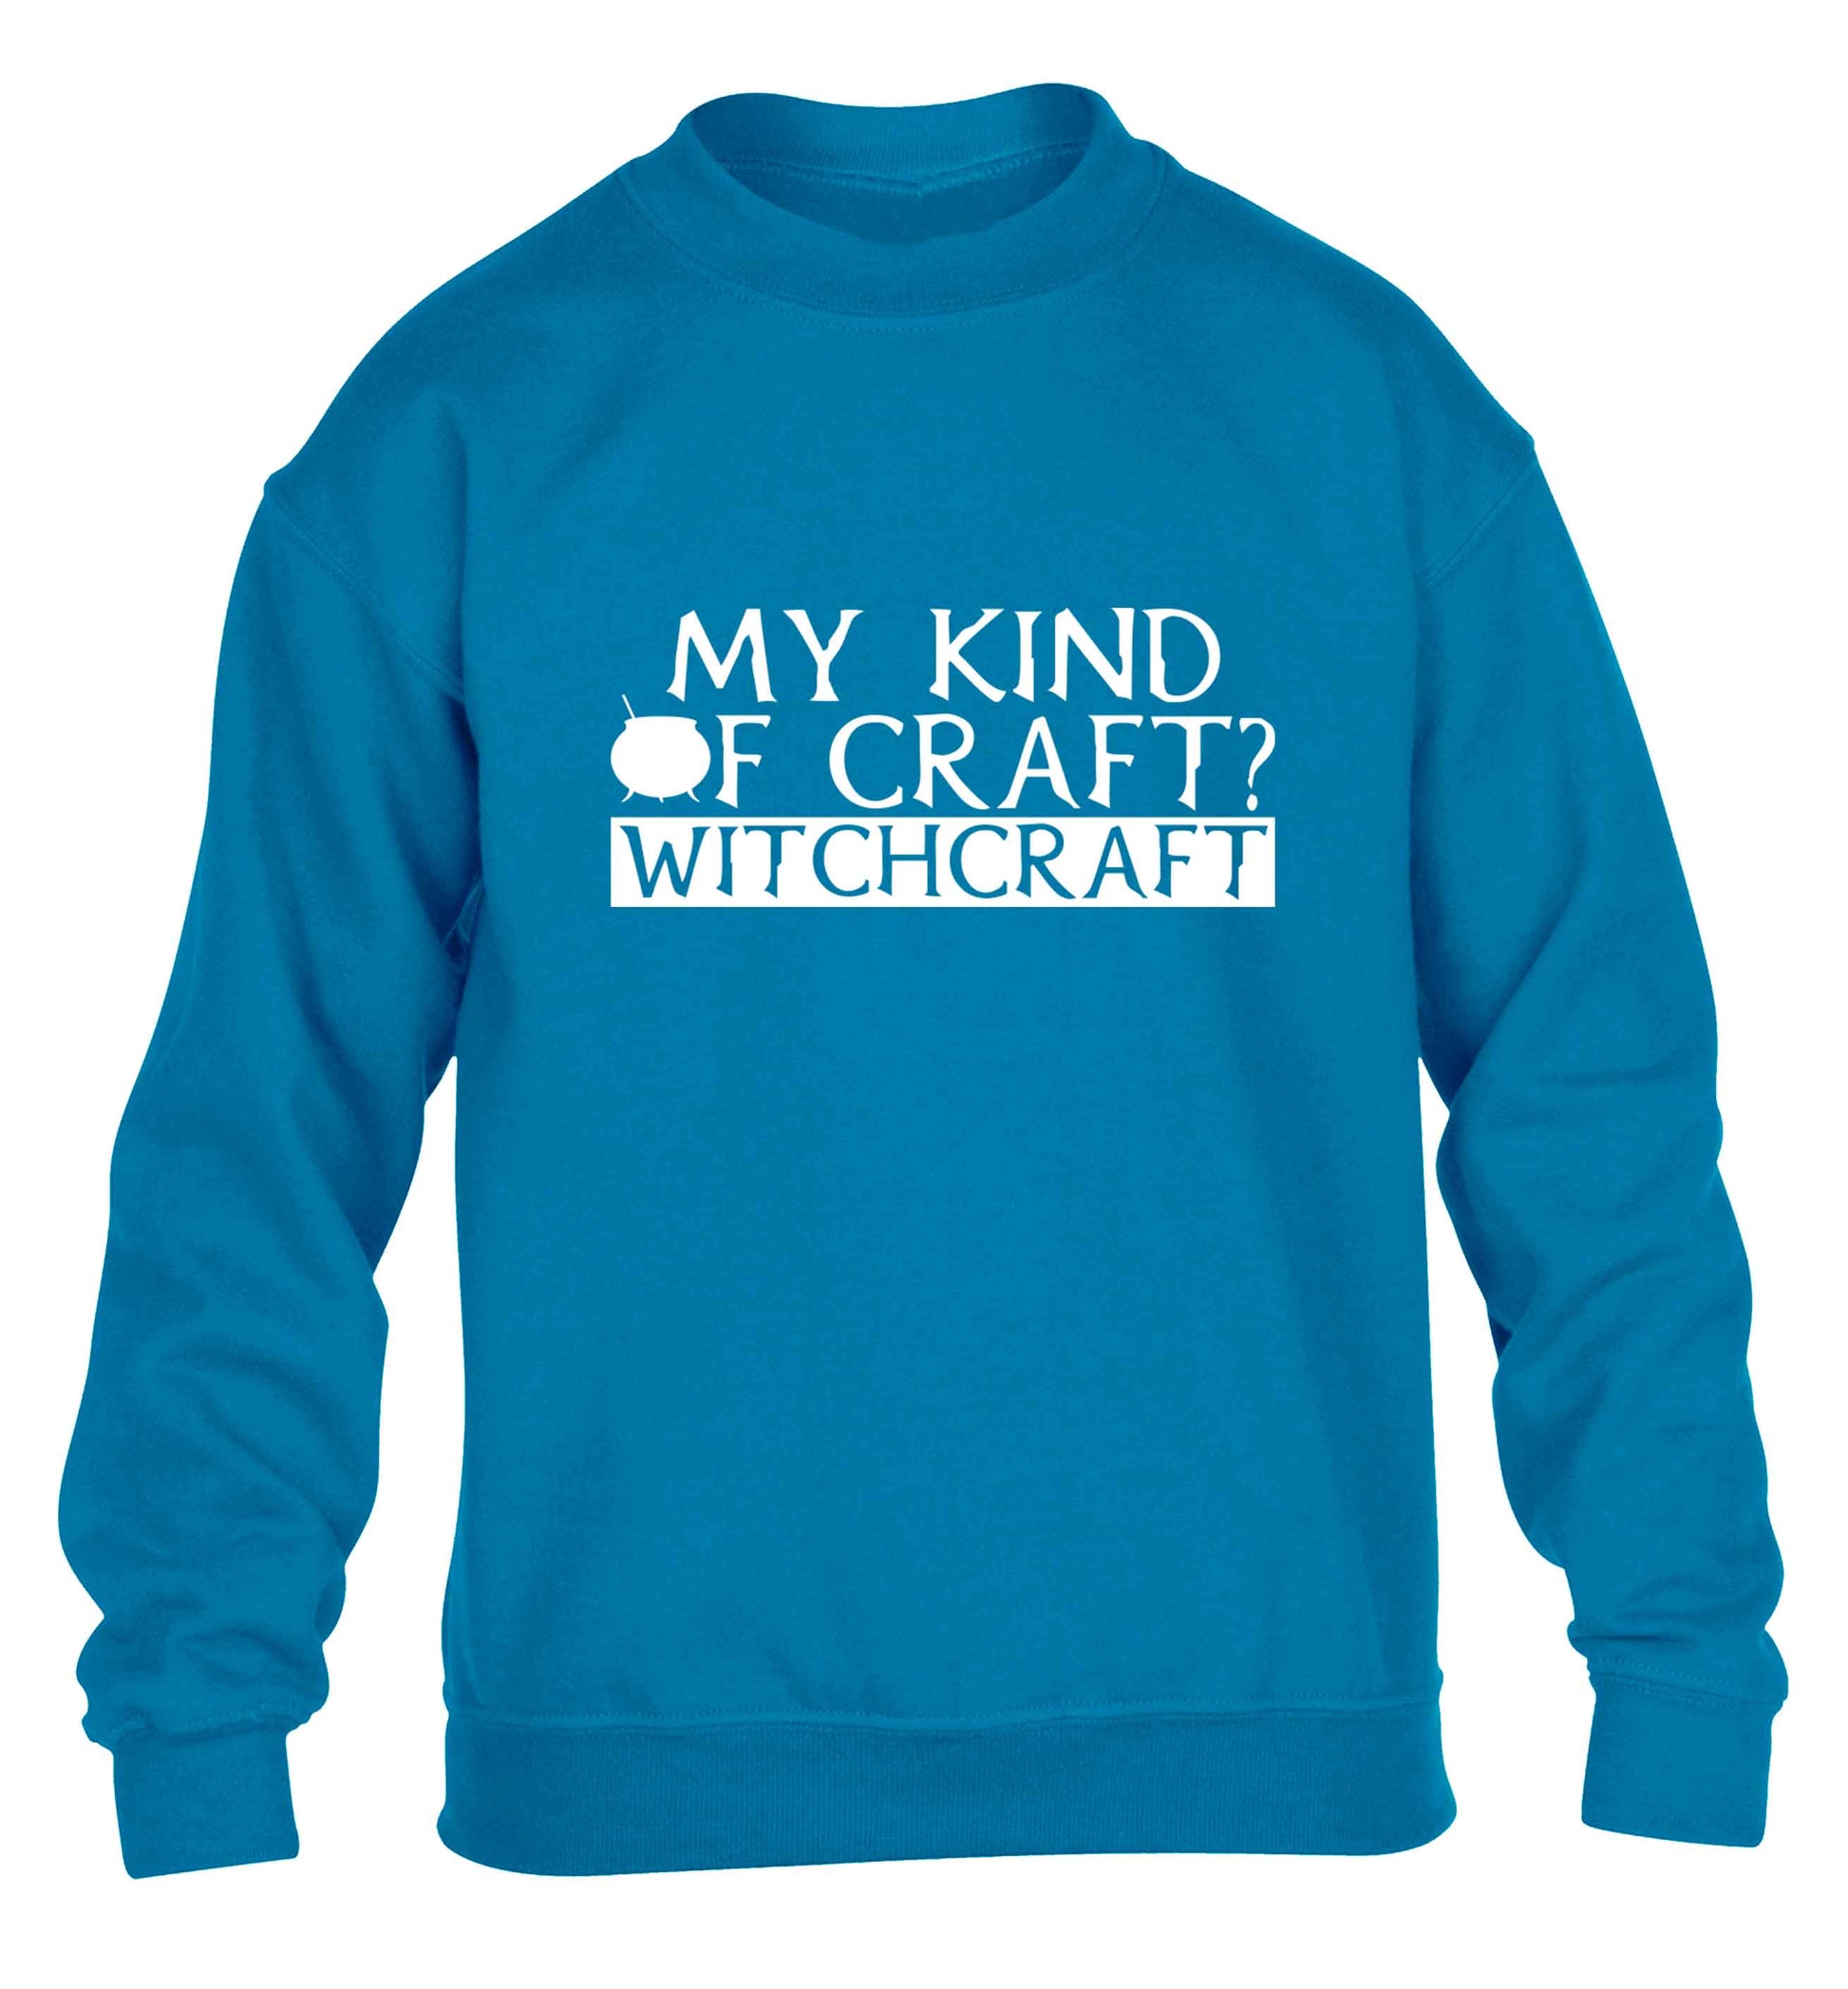 My king of craft? witchcraft  children's blue sweater 12-13 Years